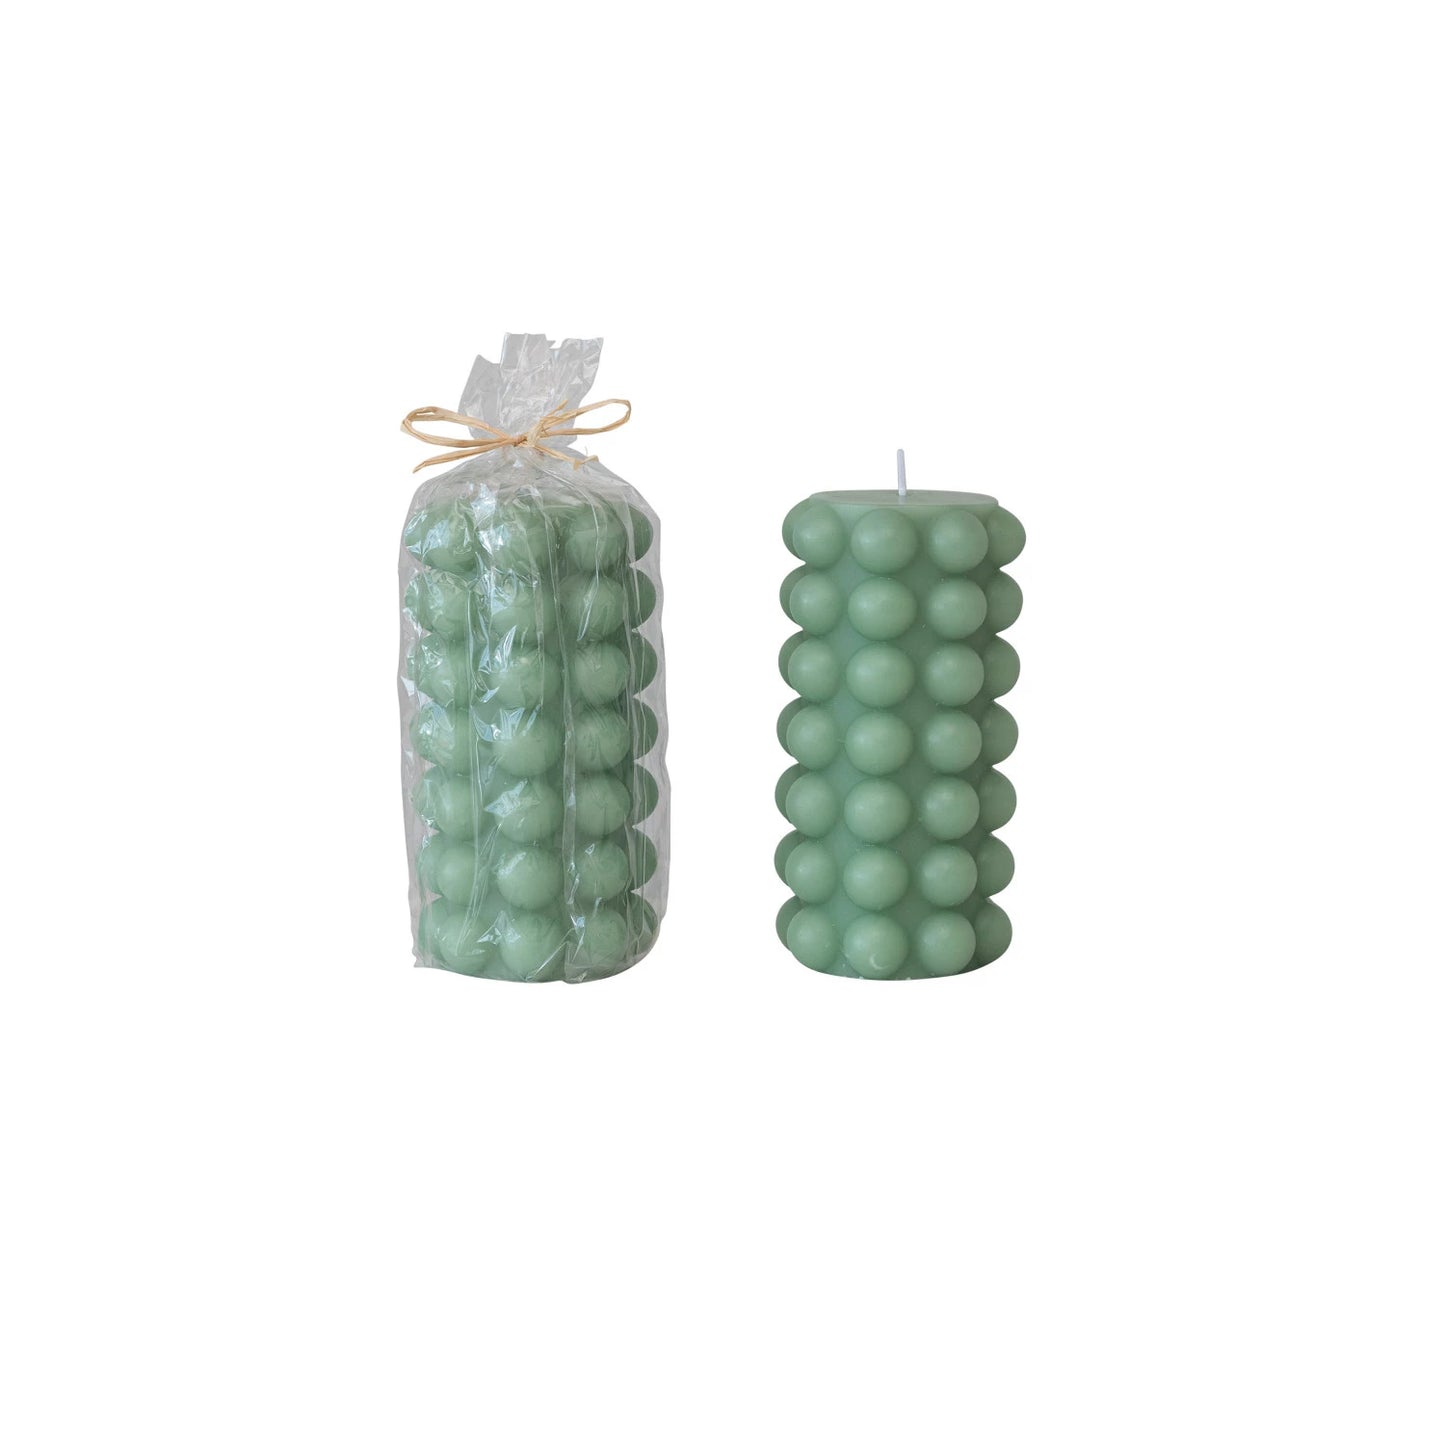 one tall teal hobnail pillar candle in clear wrap tied with twine and one with out packaging on a white background